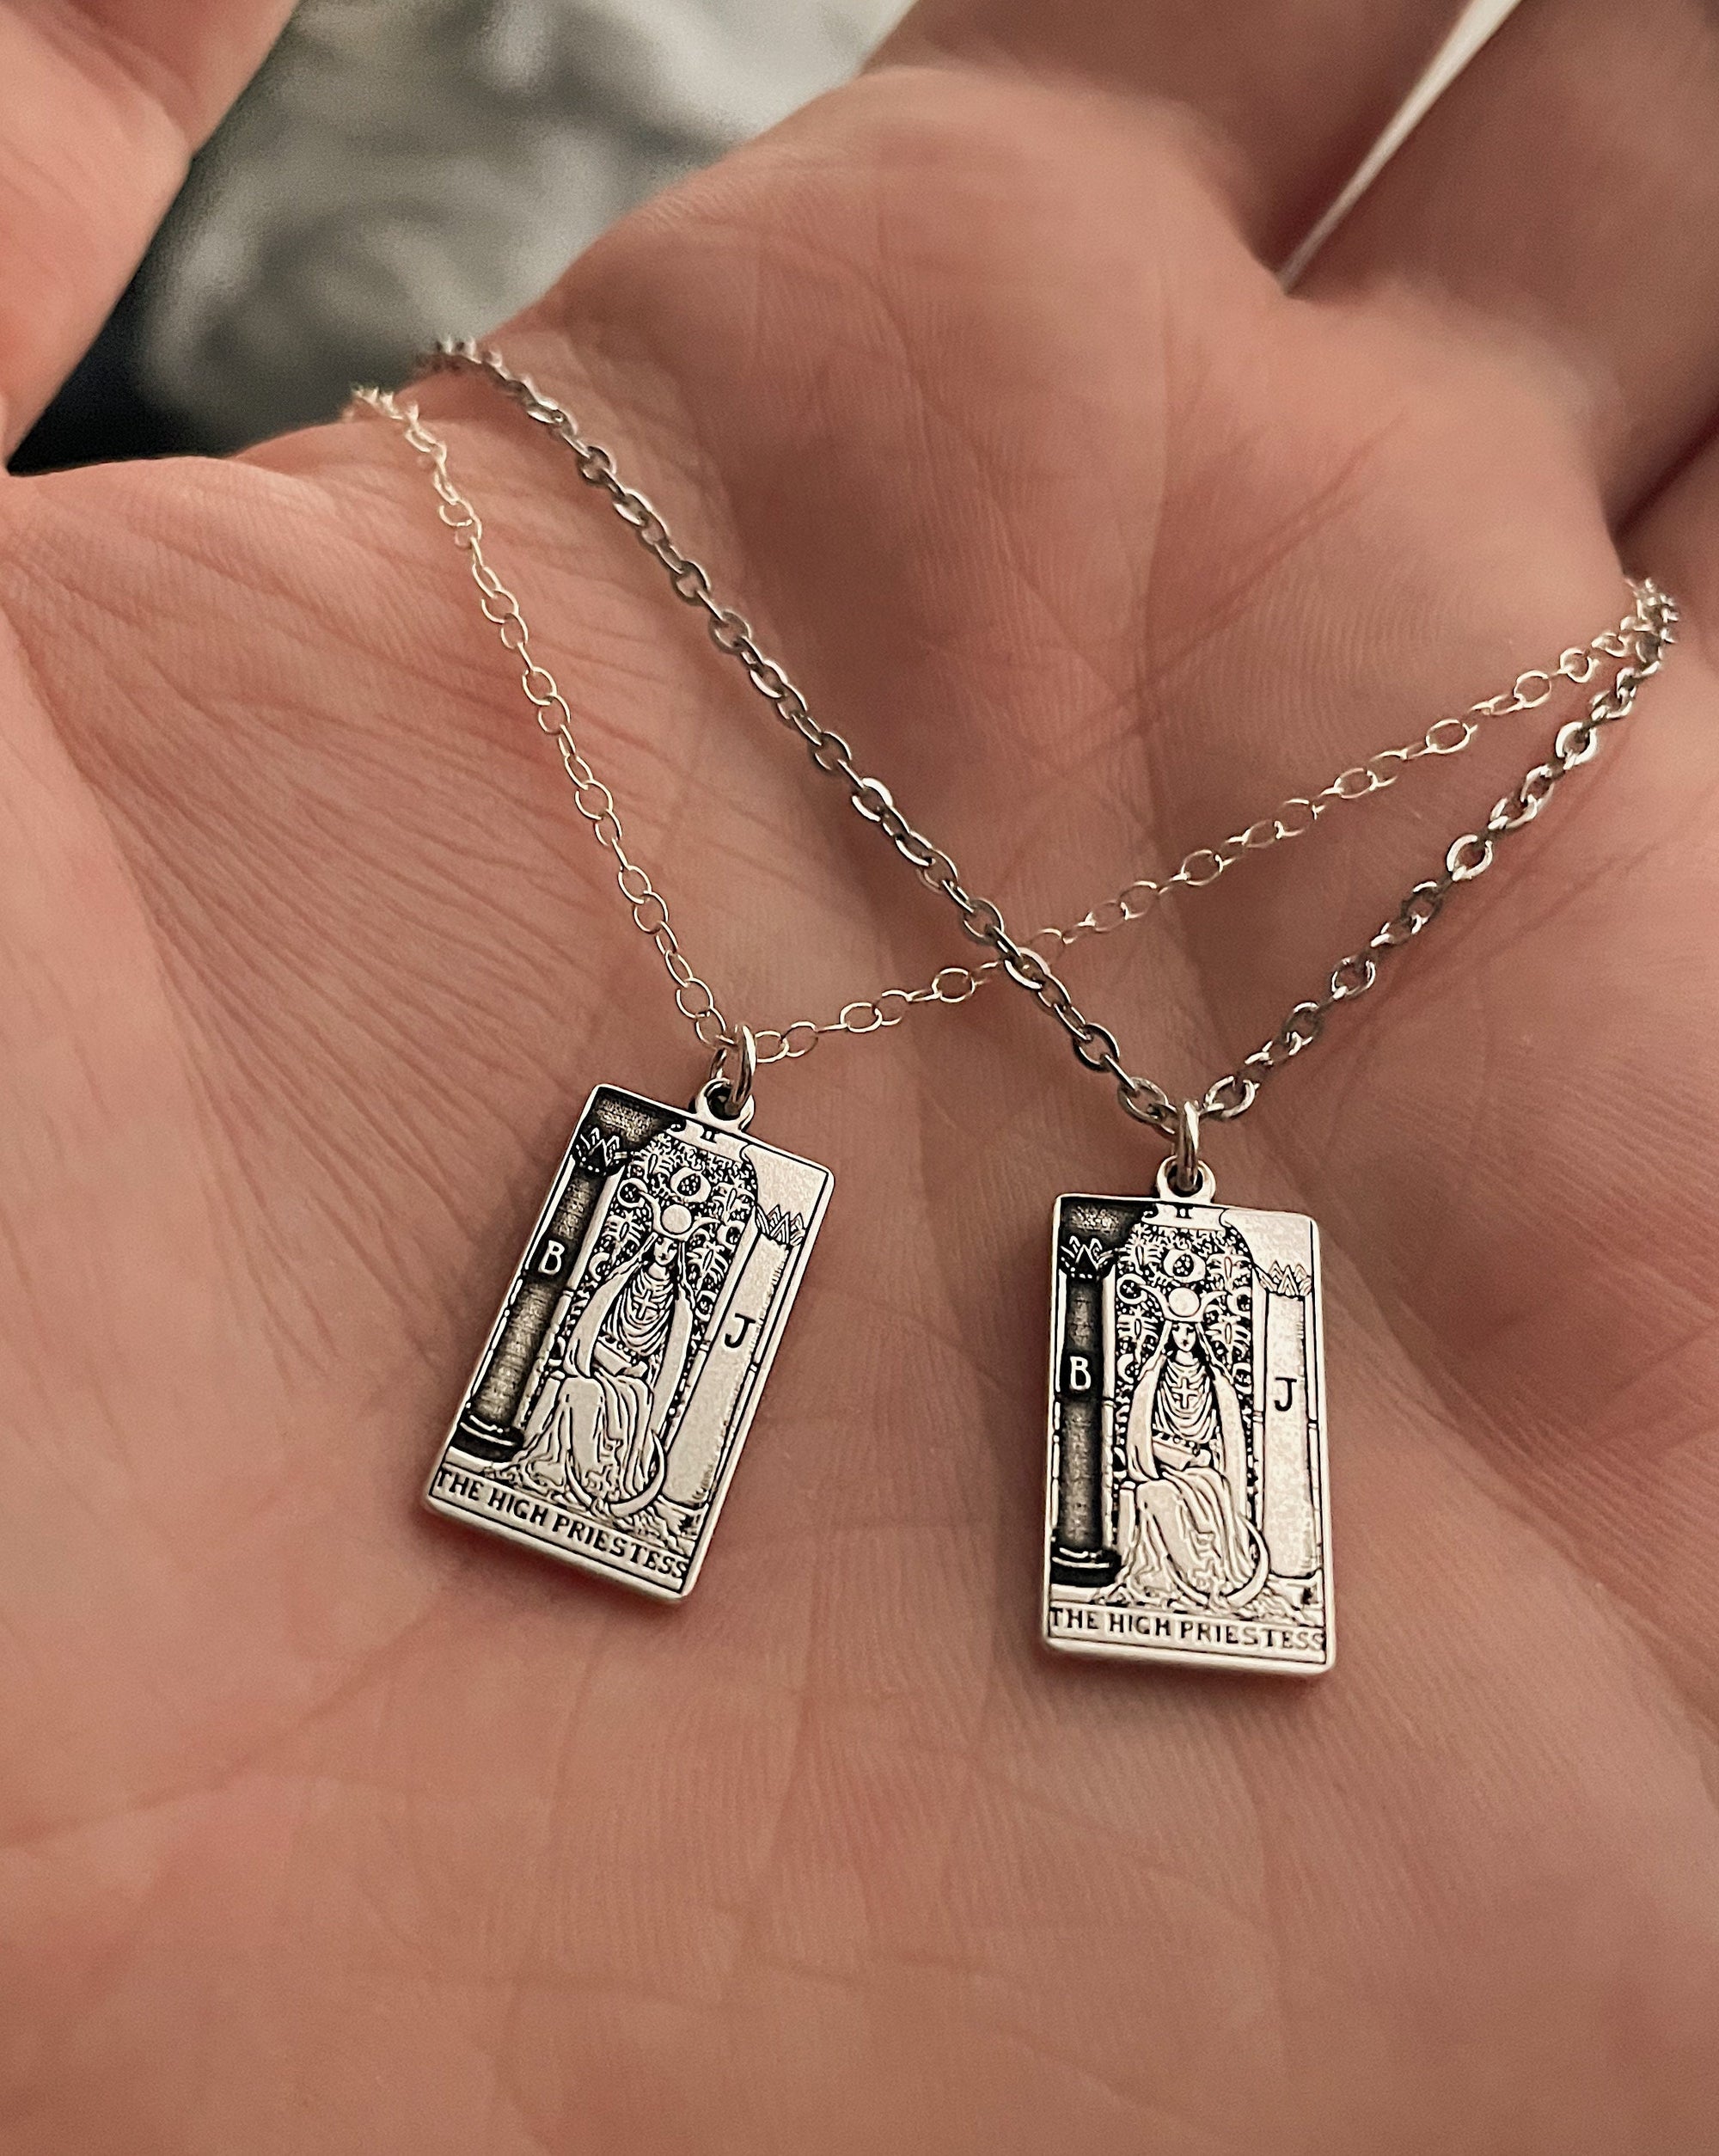 The High Priestess Tarot Card Necklace - Sterling Silver